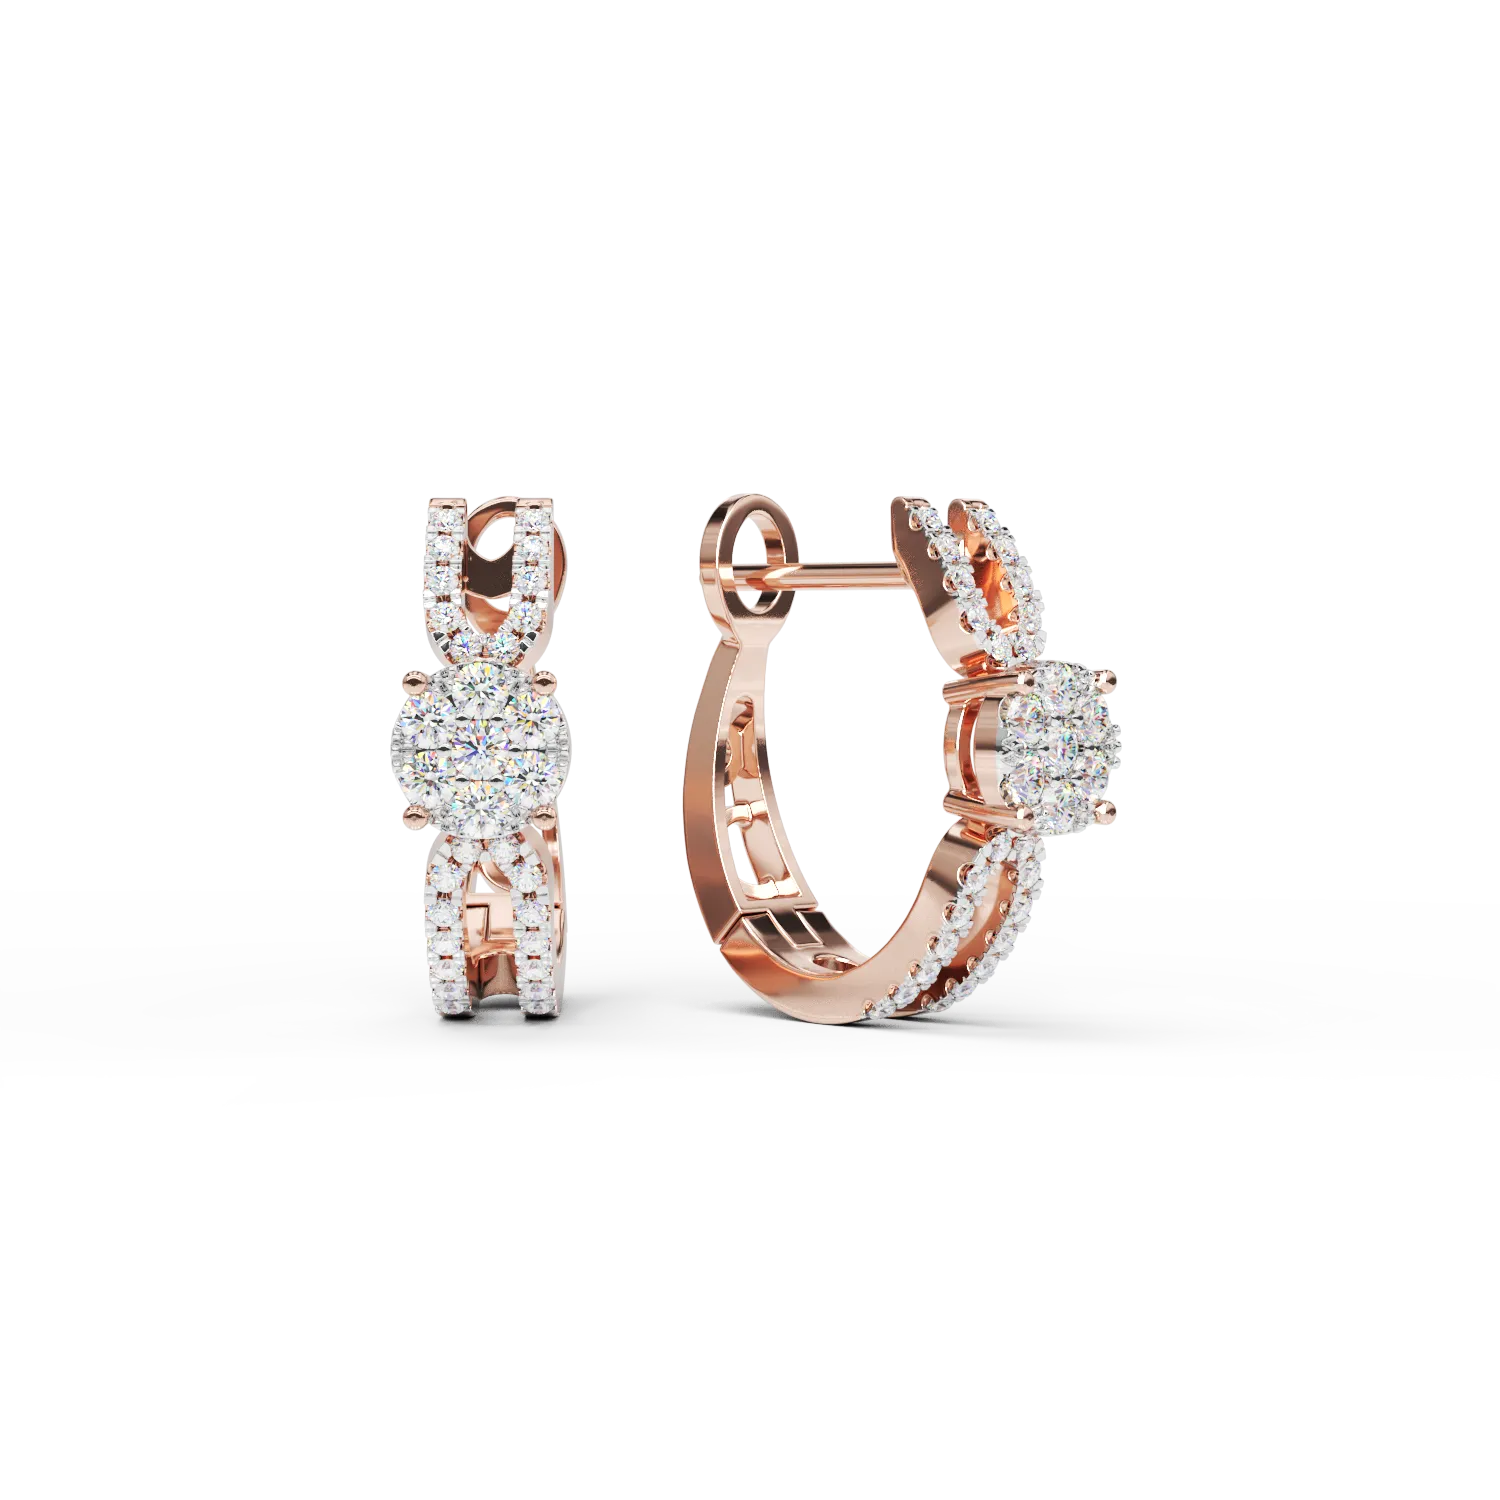 18K rose gold earrings with 0.41ct diamonds